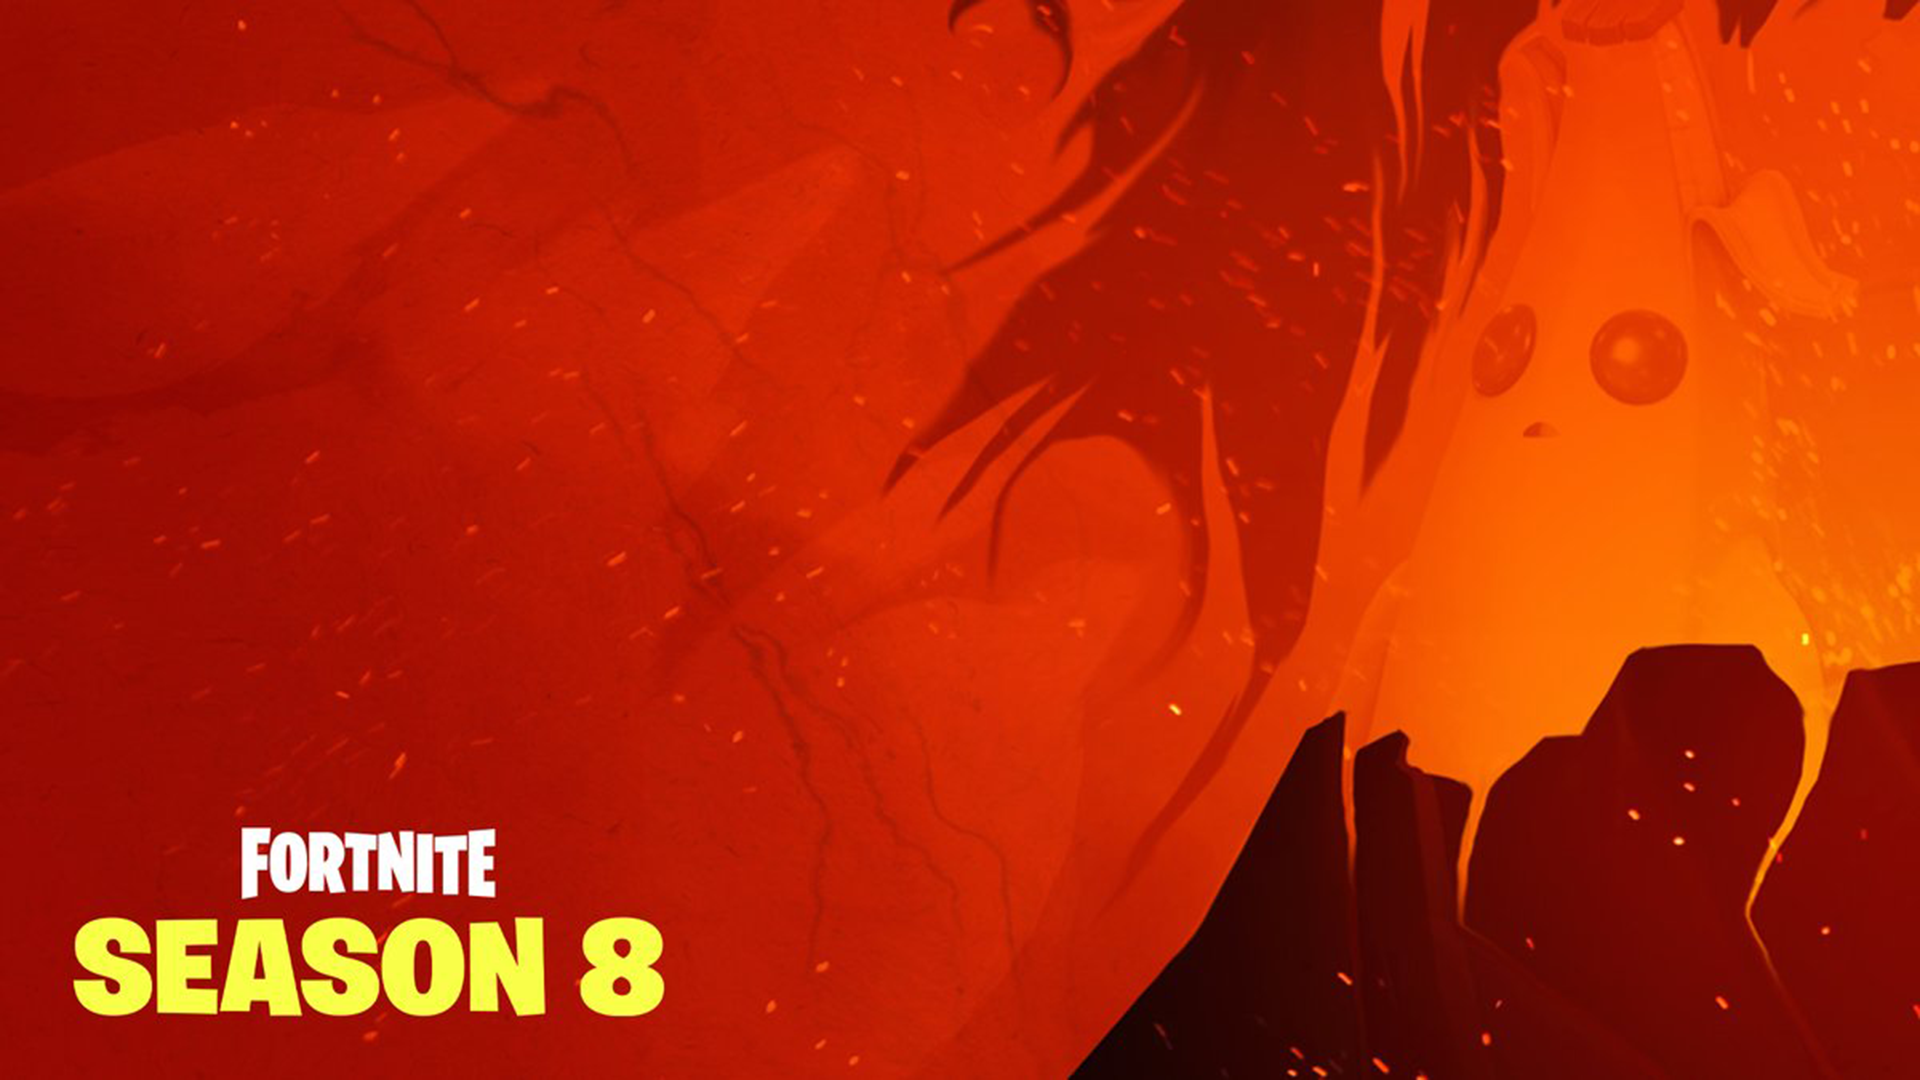 What Time Does Fortnite Season 8 Start Date Te!   asers And Info - in recent days fortnite users have been caught up in earthquakes that shake the map and cause actual fissures in the ground below